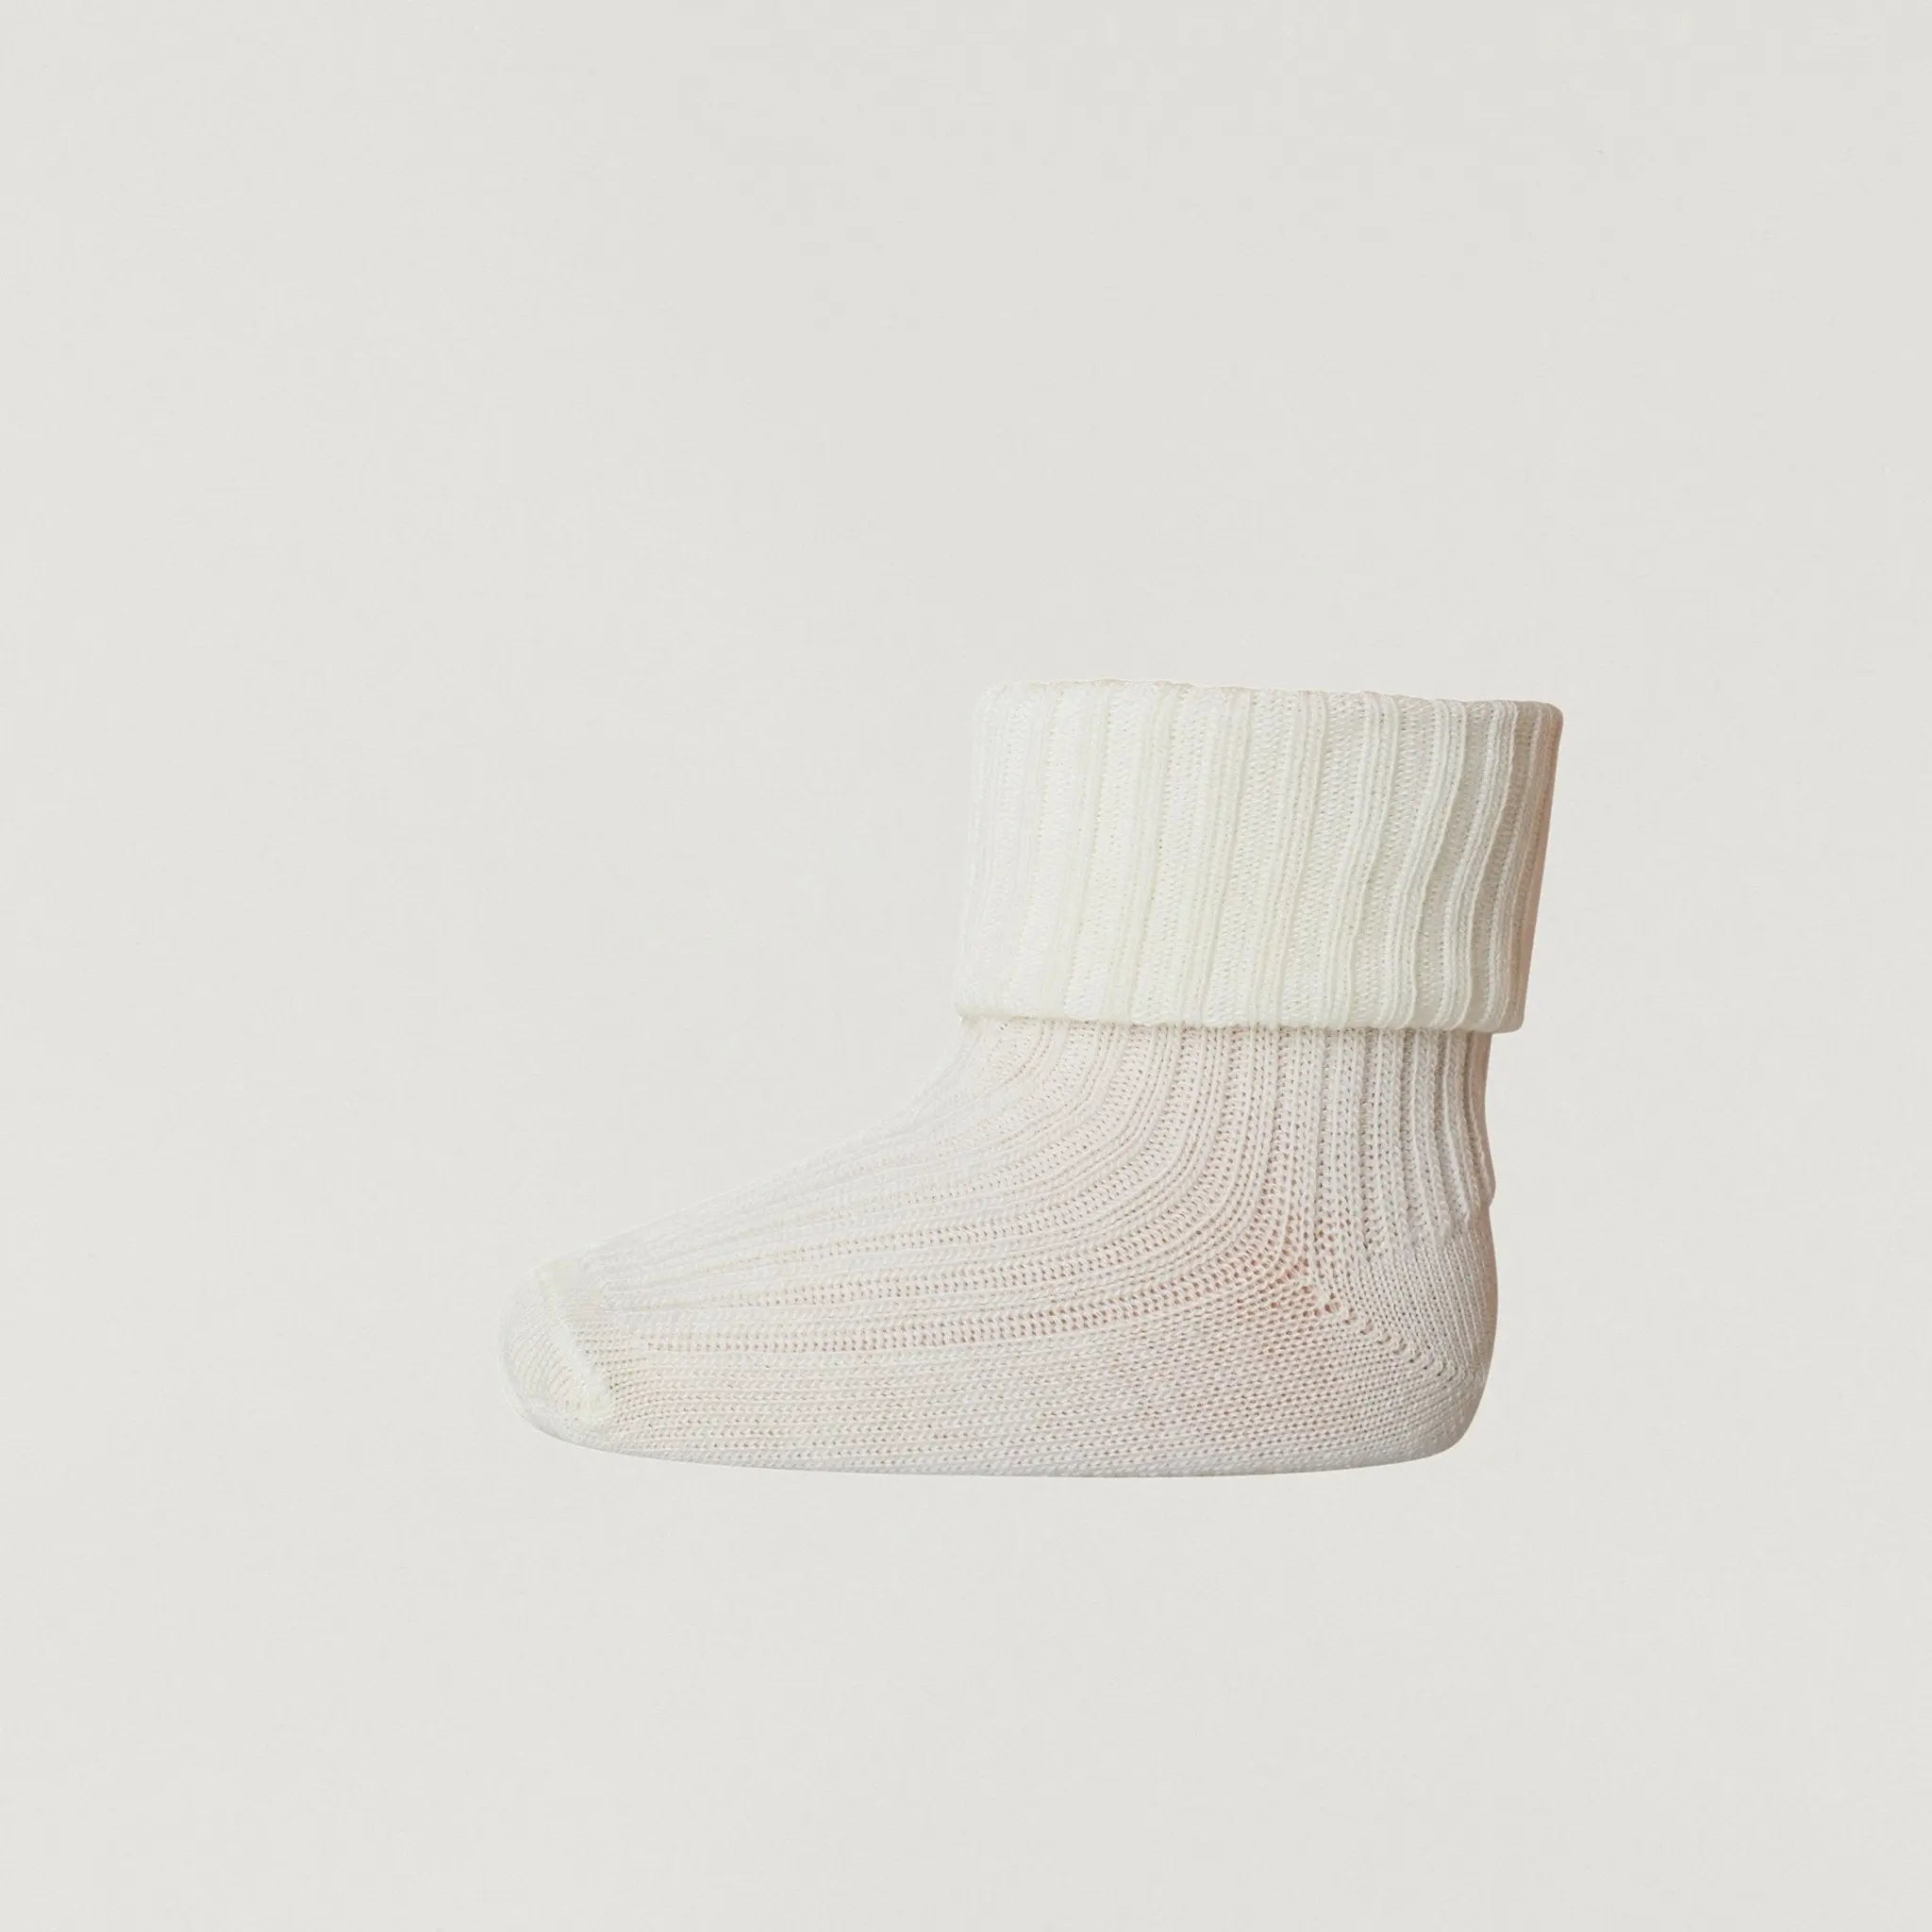 Babybox and Family MP Denmark Socken aus Wolle - AW2022 creme-432 15-16 #farbe_creme-432